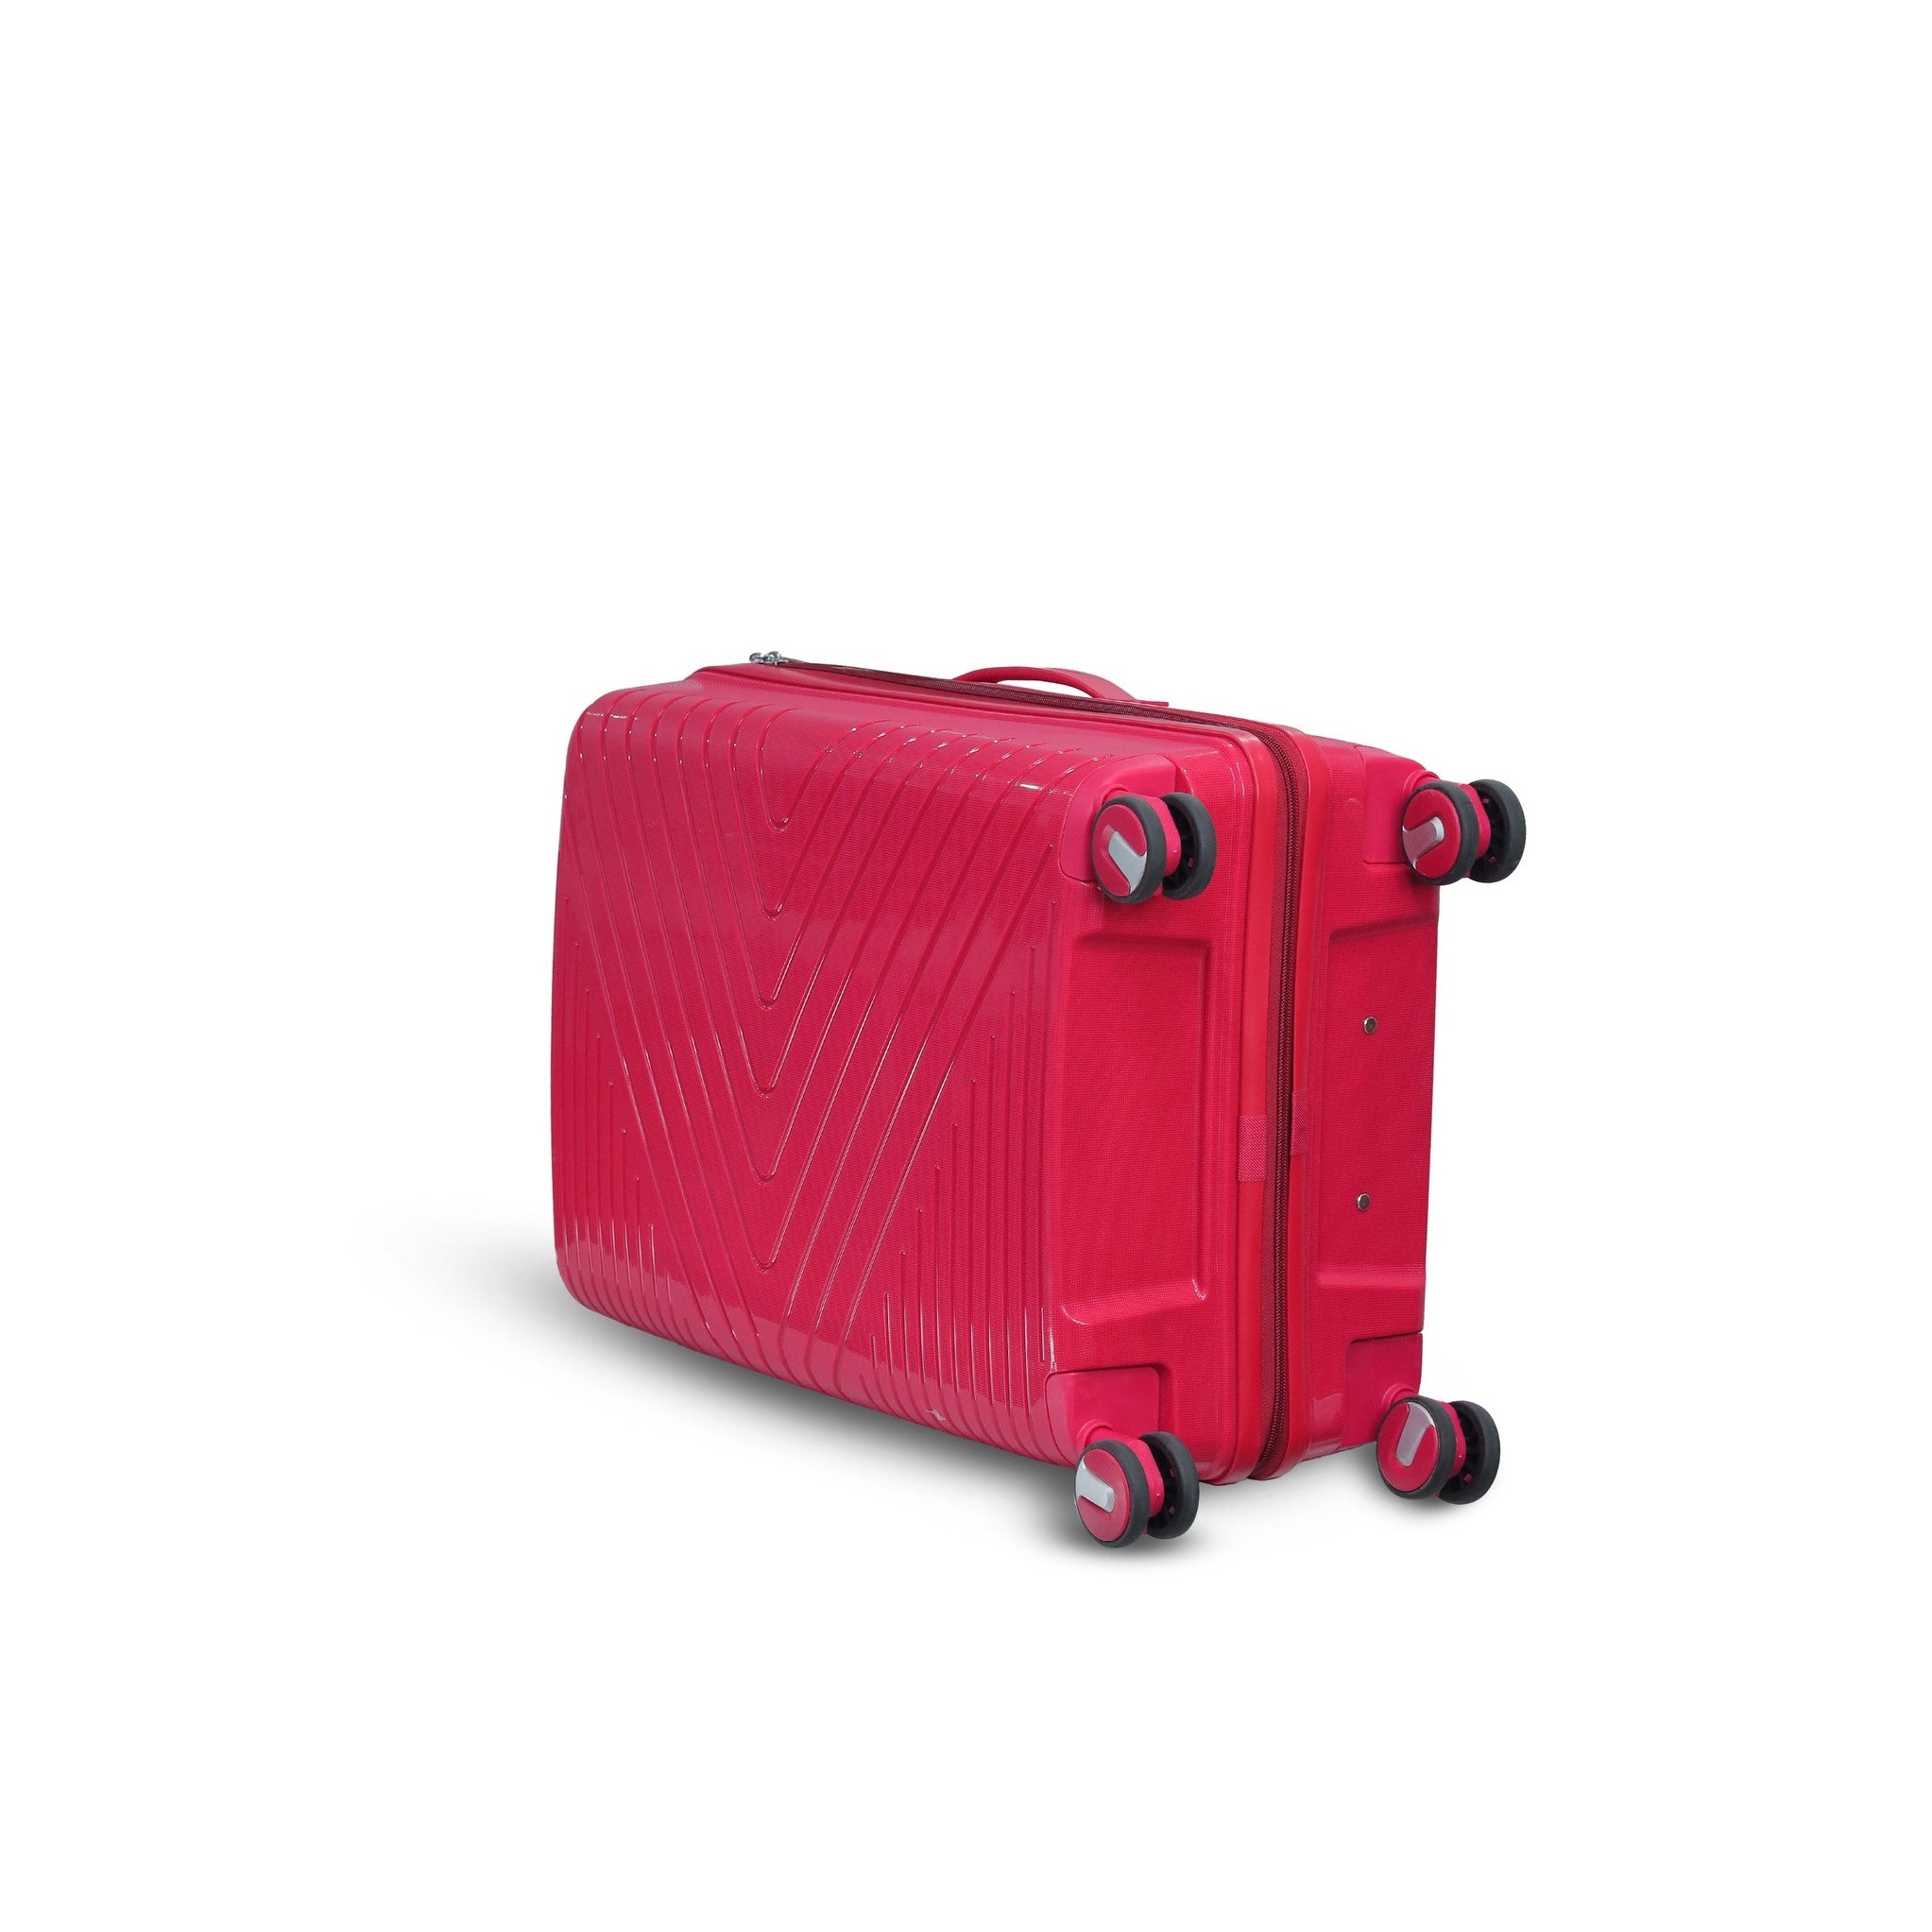 3 Piece Set 20" 24" 28 Inches Red Crossline PP Unbreakable Luggage Bag with Double Spinner Wheel